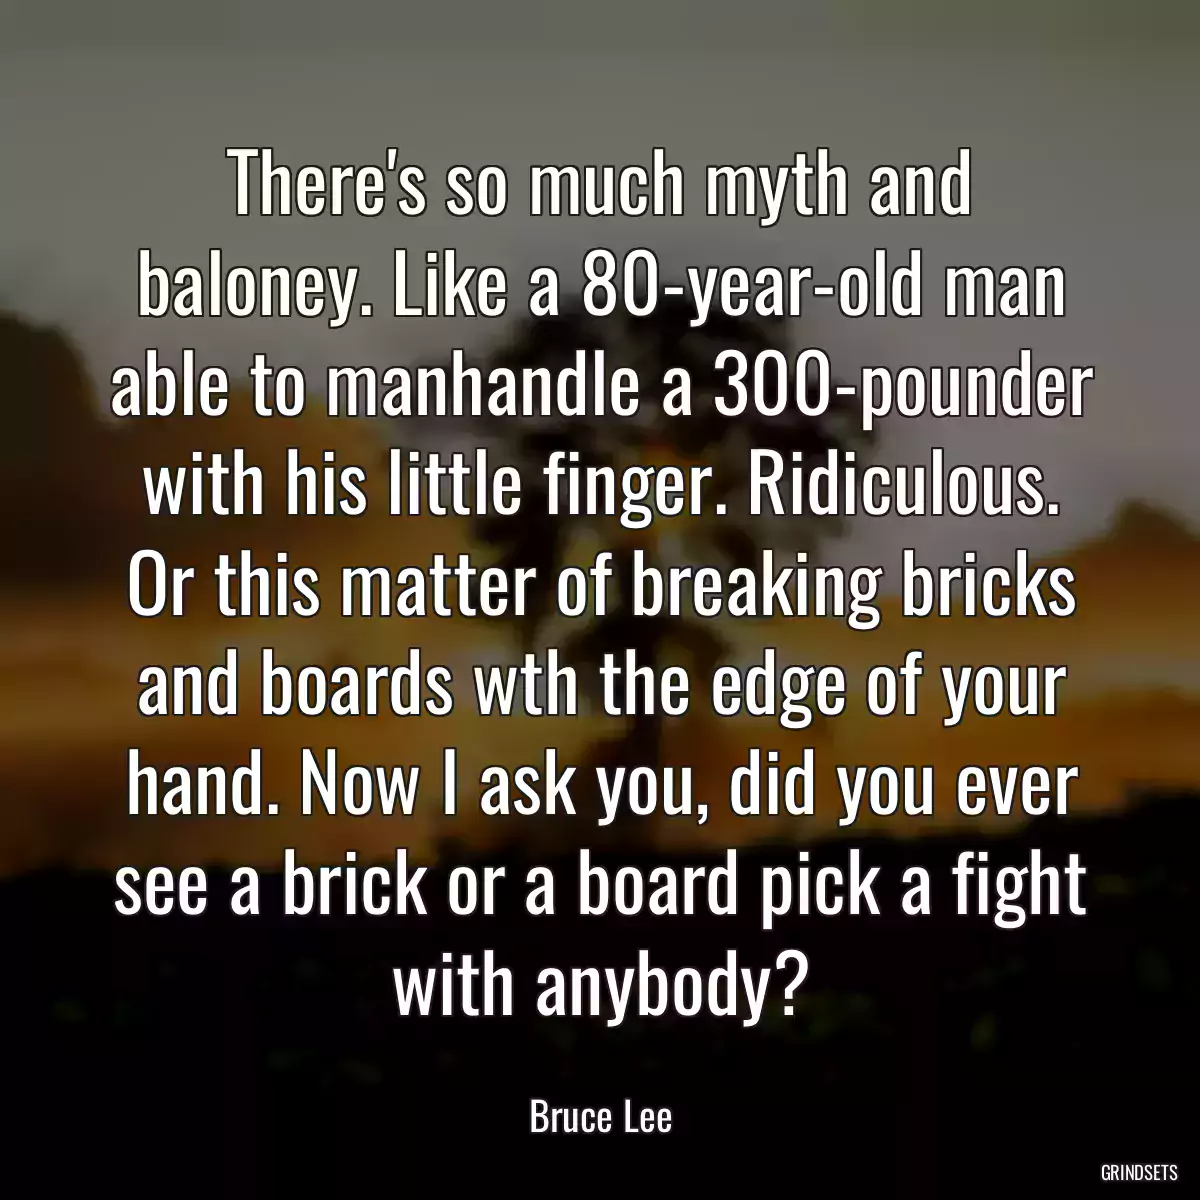 There\'s so much myth and baloney. Like a 80-year-old man able to manhandle a 300-pounder with his little finger. Ridiculous. Or this matter of breaking bricks and boards wth the edge of your hand. Now I ask you, did you ever see a brick or a board pick a fight with anybody?